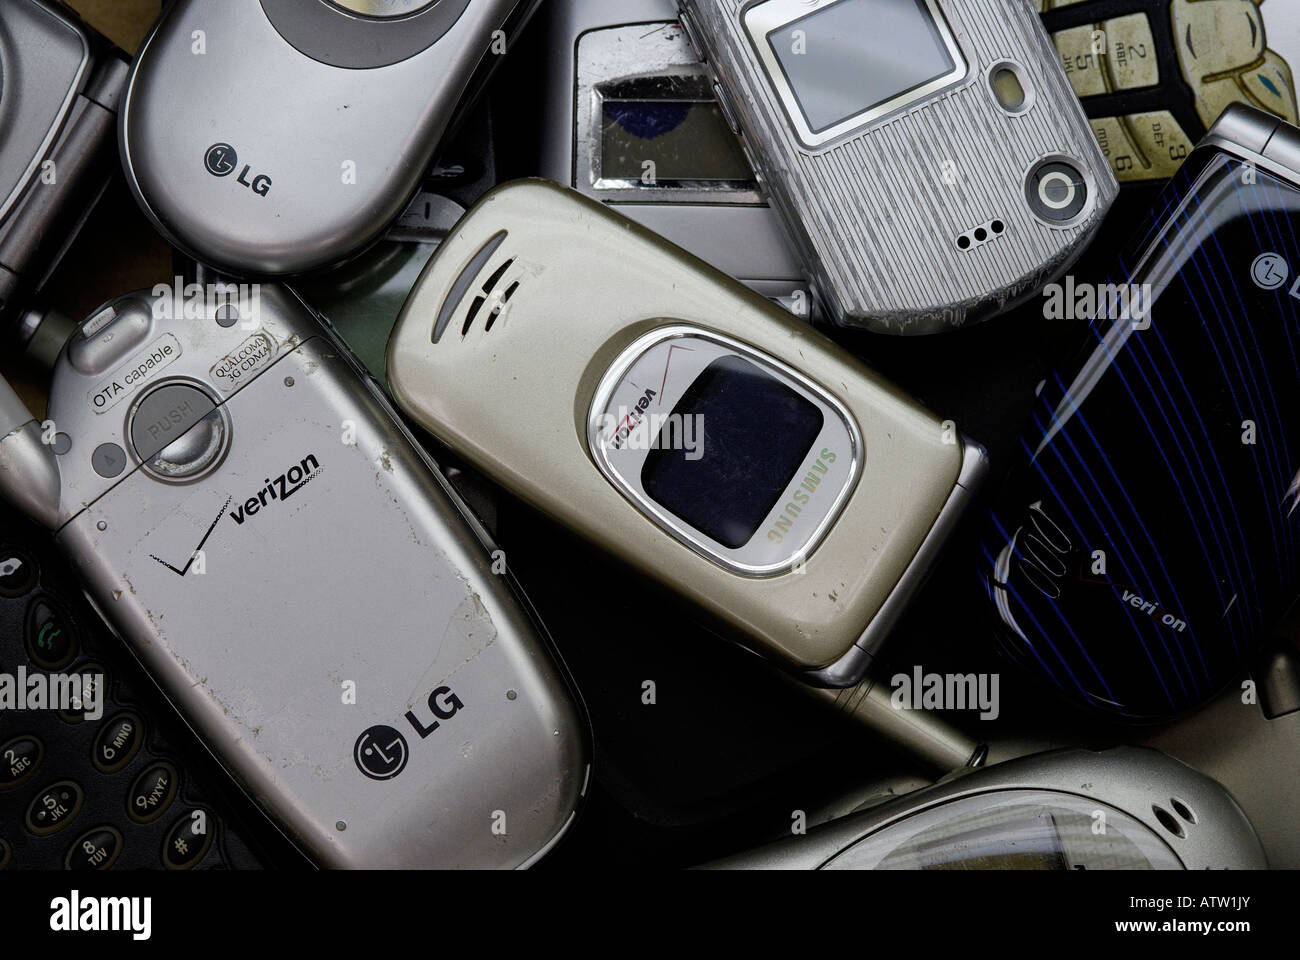 Old flip cell phones collected to be shipped to a recycling center Stock Photo